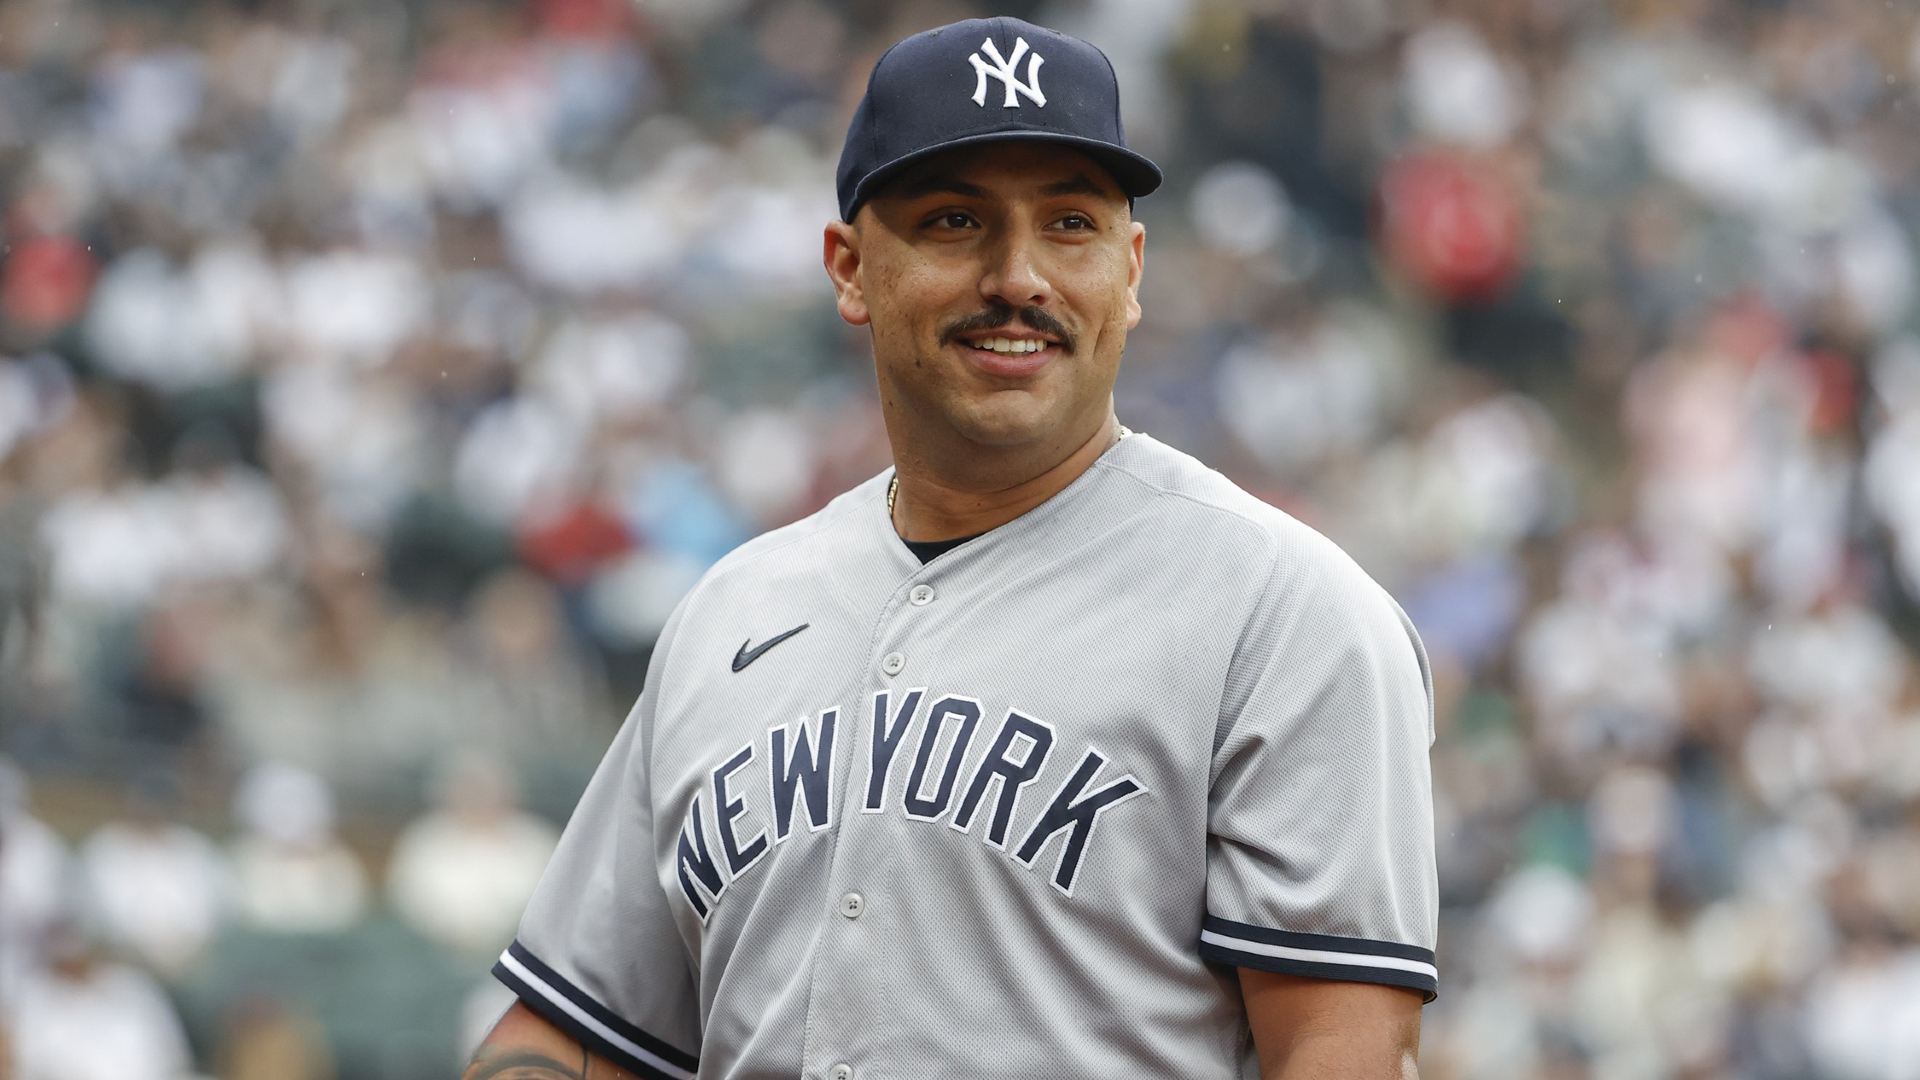 Nestor Cortes' recent stint with Yankees surpasses opening one - BVM Sports